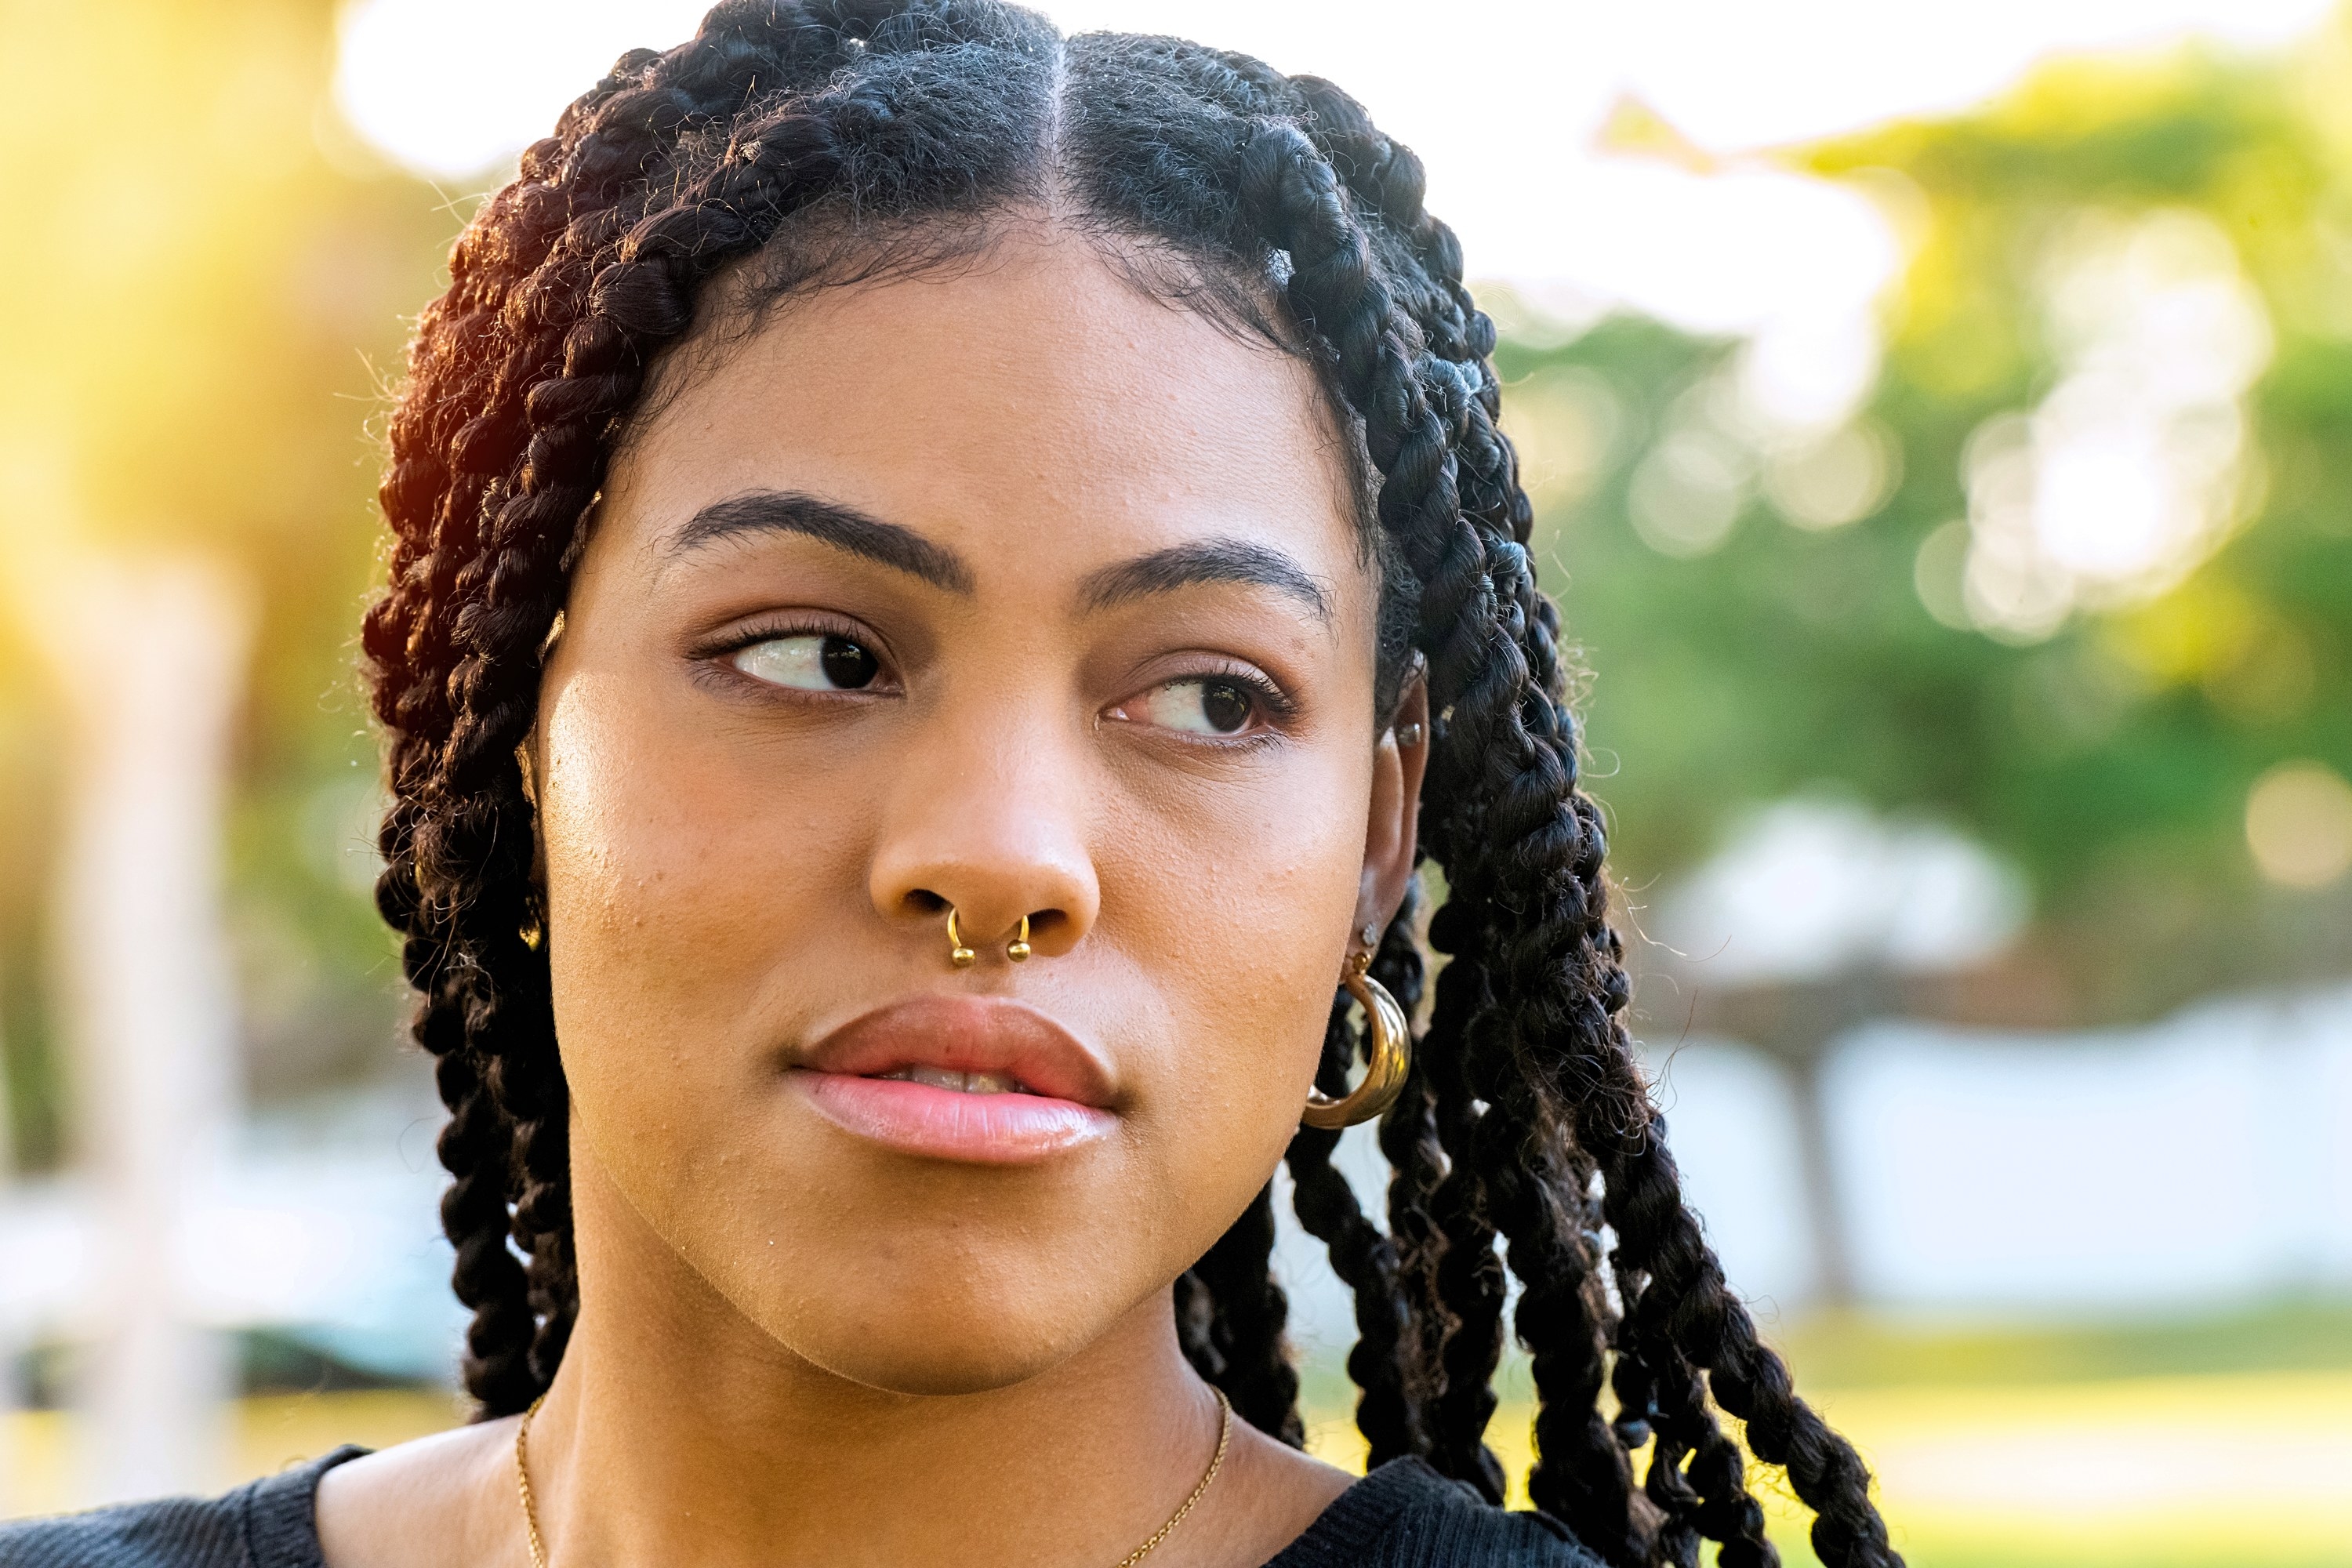 afrolatine woman with braids and a septum piercing